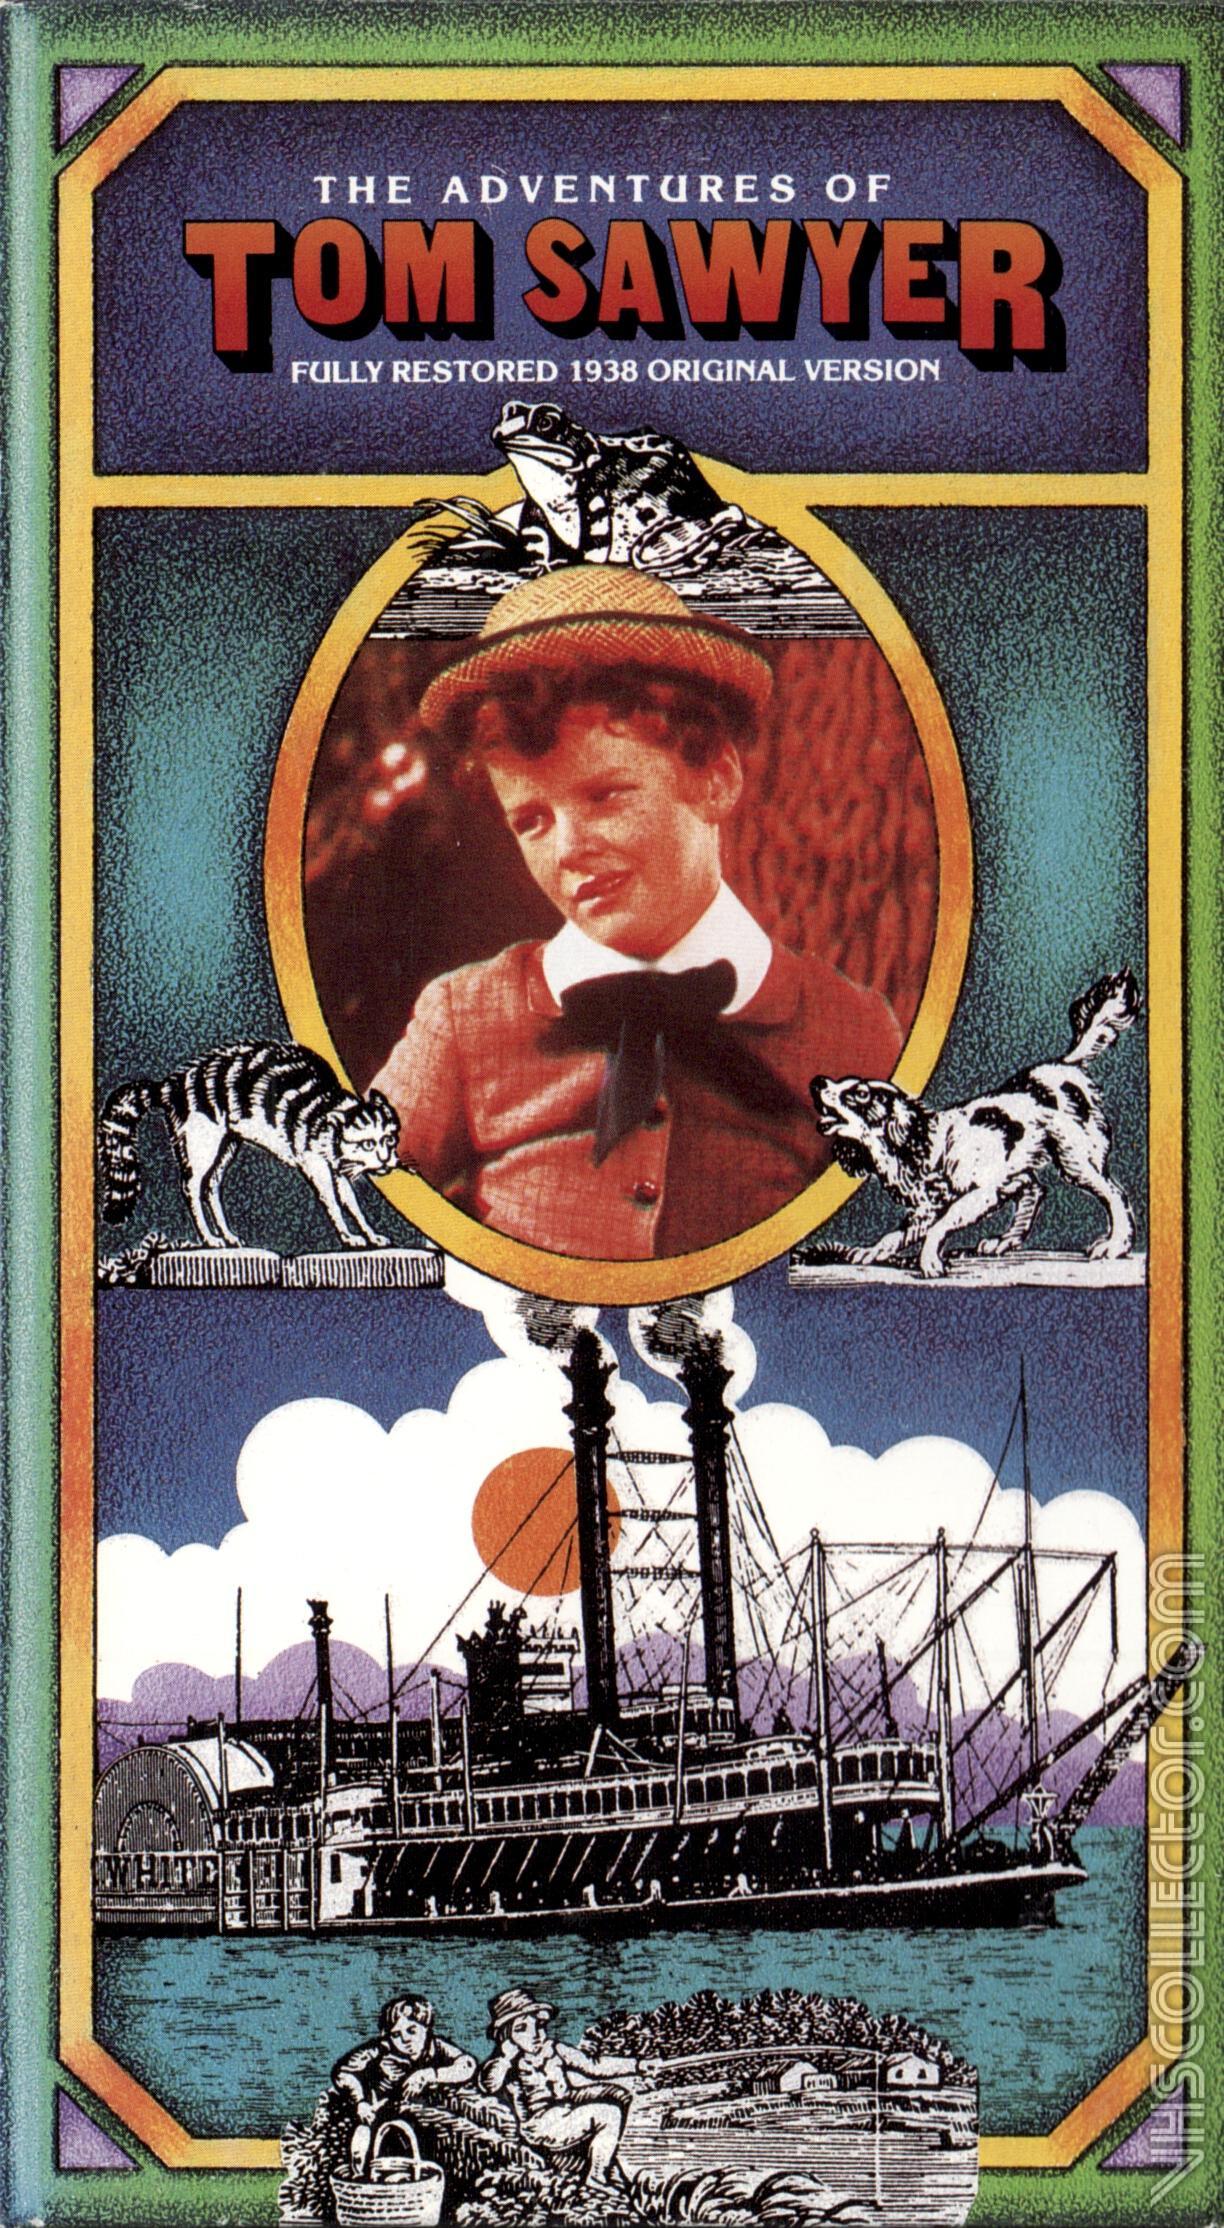 The Adventures of Tom Sawyer | VHSCollector.com